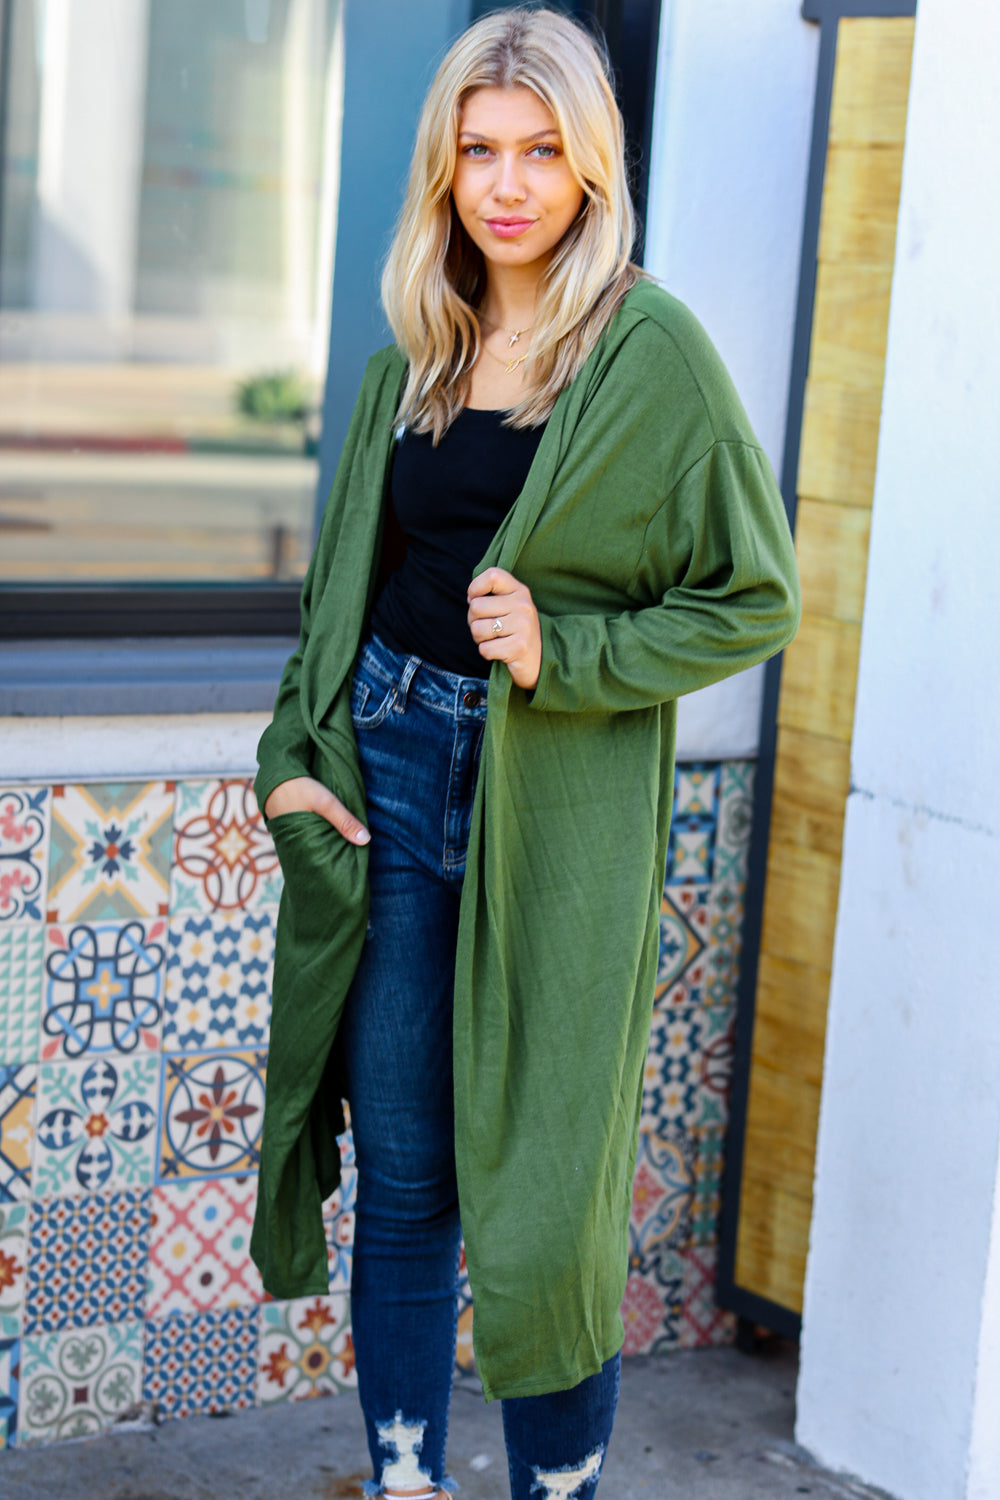 Over The Moon Cardigan in Olive